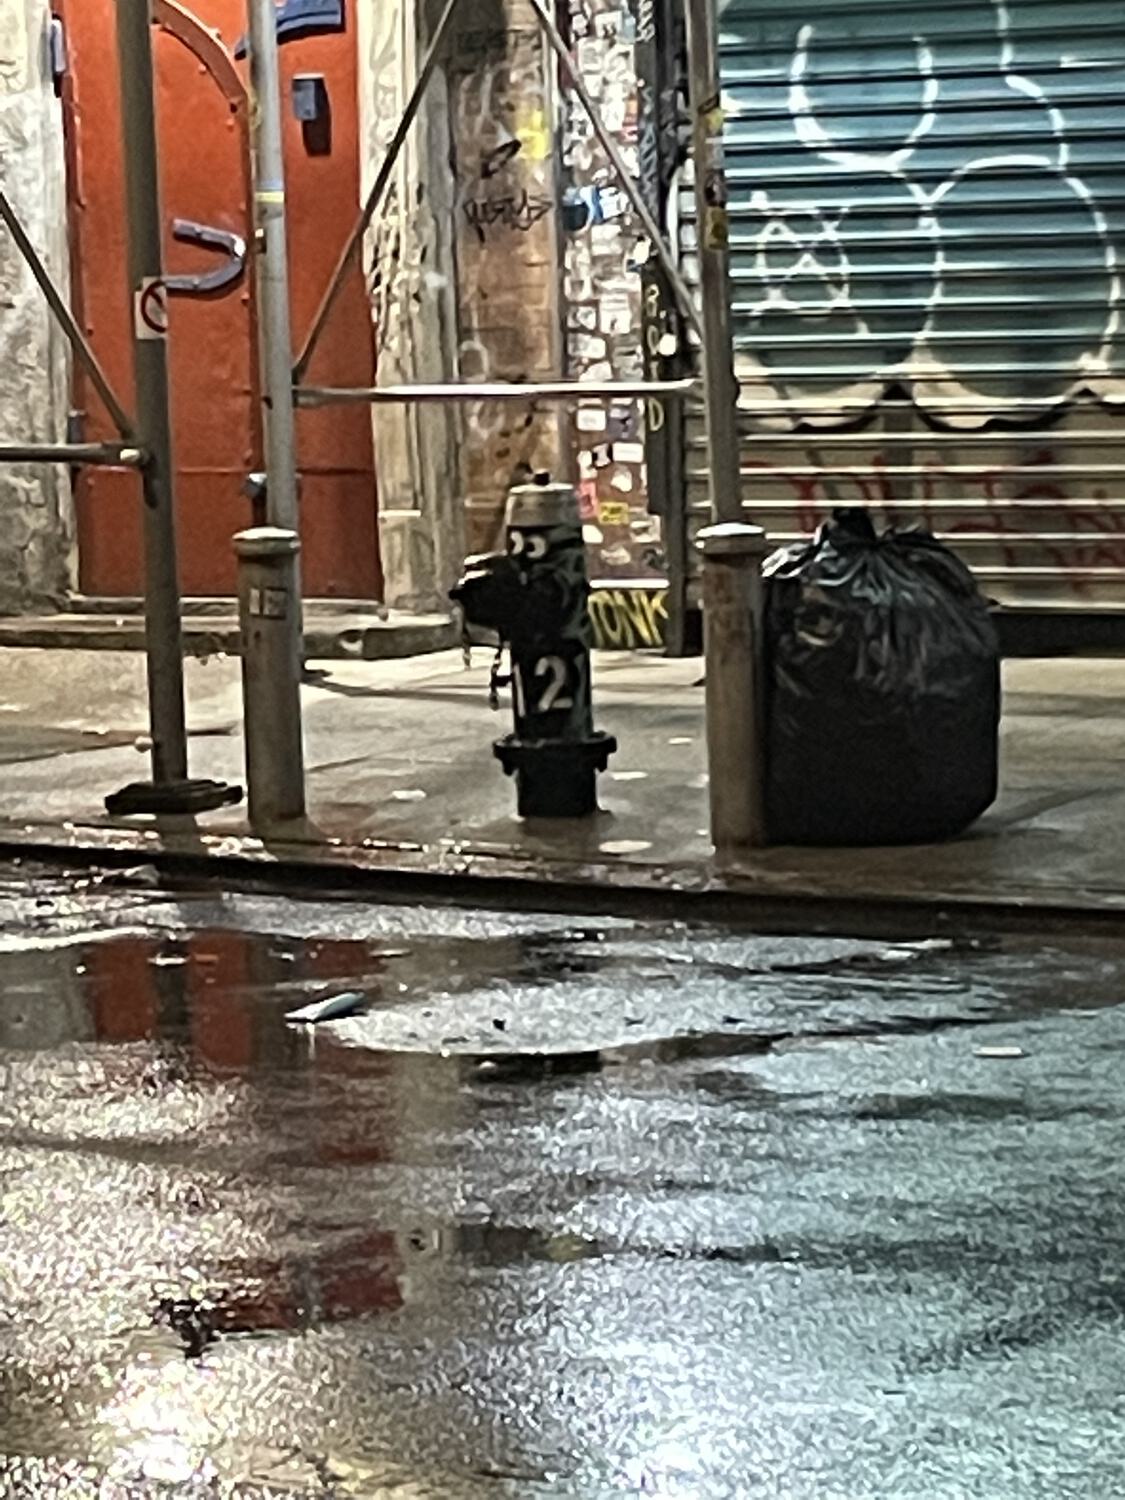 A fire hydrant with eyes, as seen from across a wet street